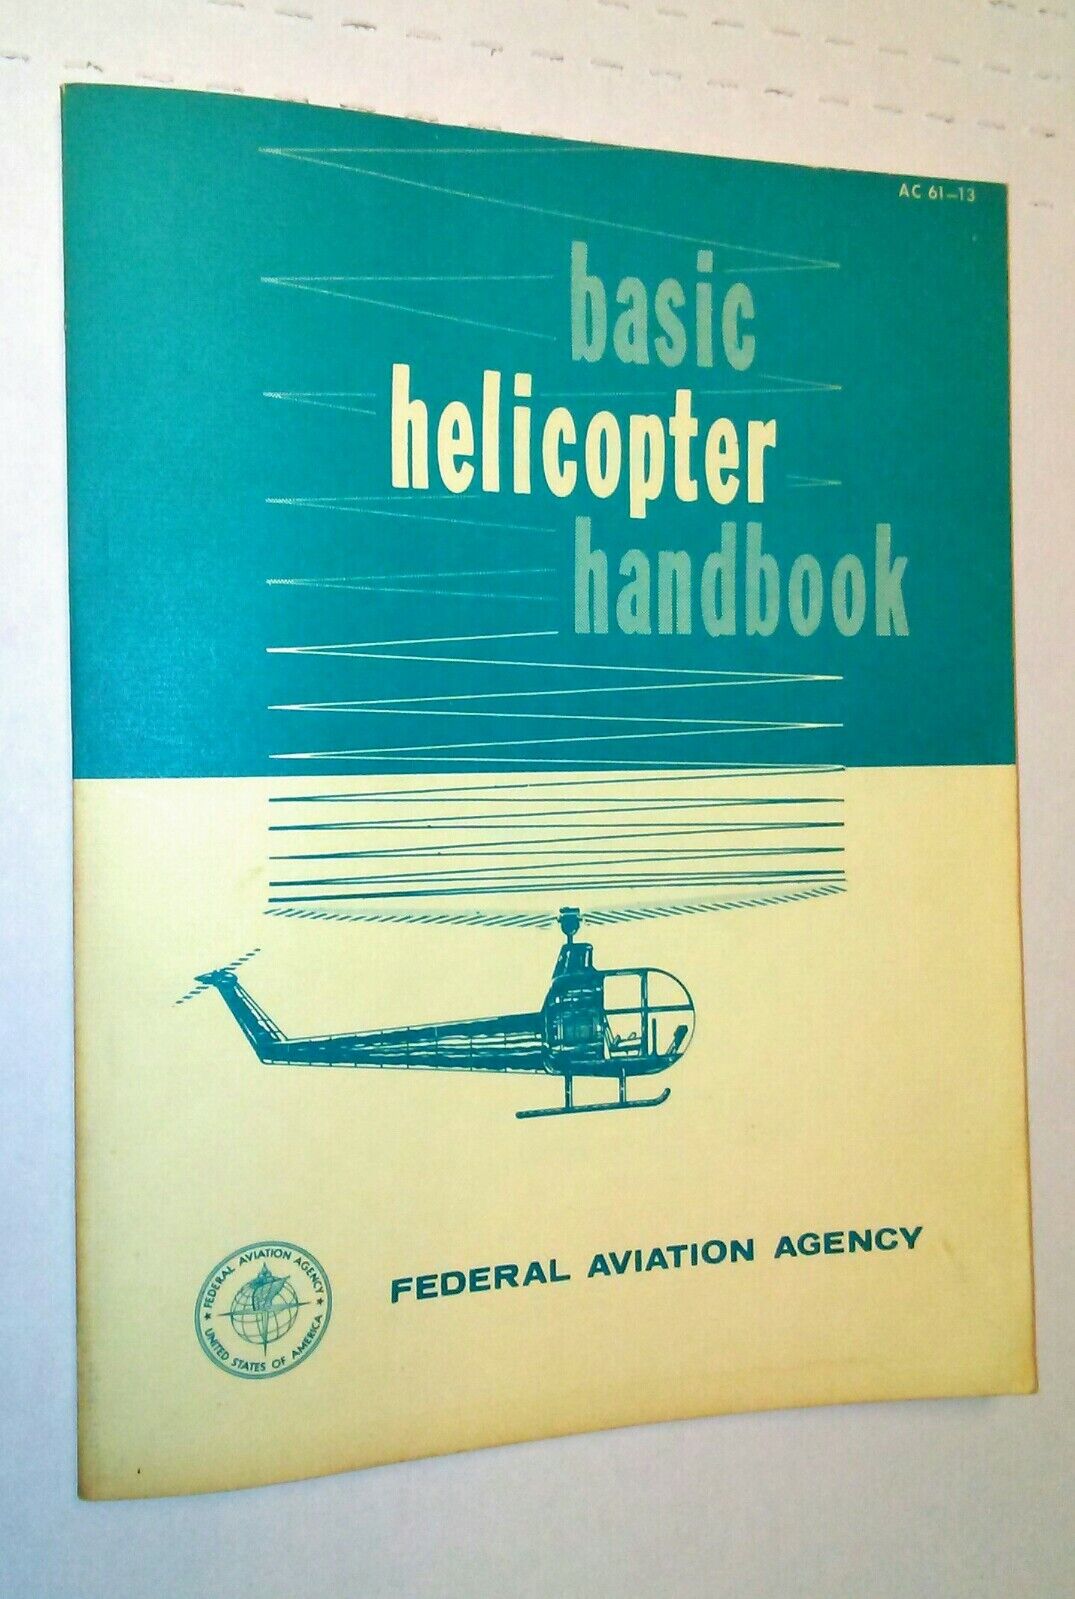 BASIC HELICOPTER HANDBOOK 1965 FEDERAL AVIATION AGENCY FIRST EDITION